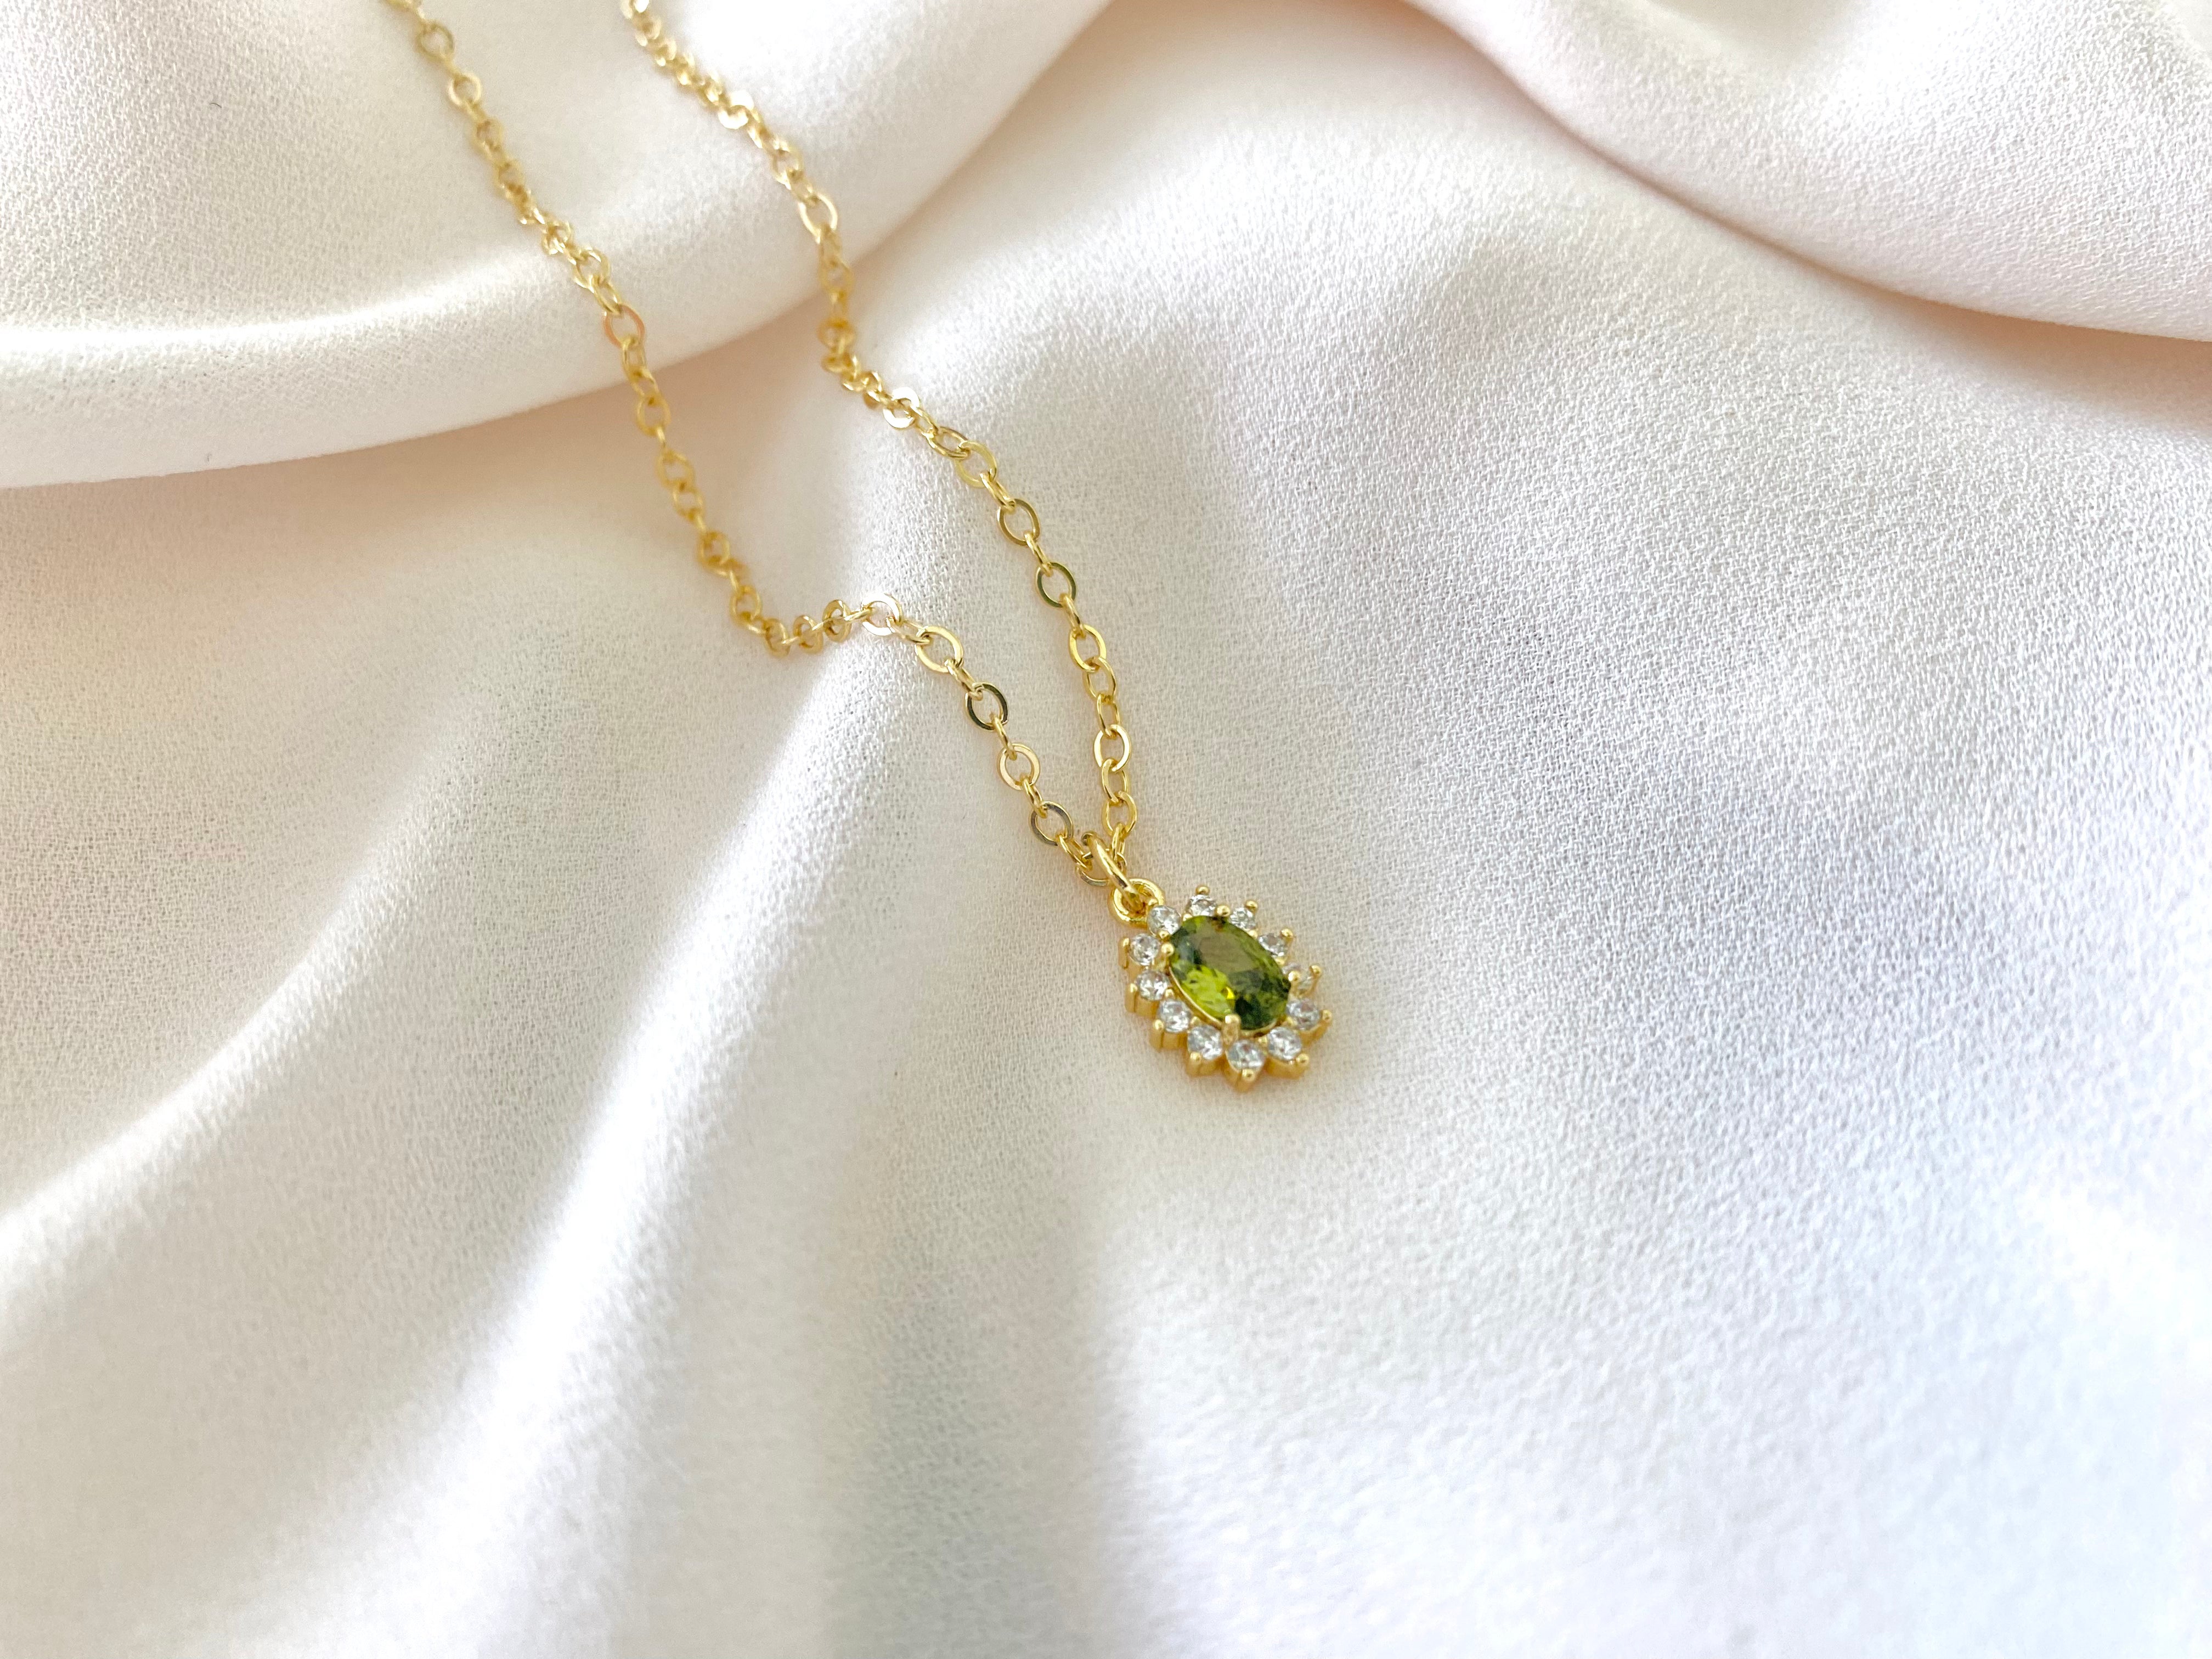 Dainty Peridot Pendant Necklace - August Birthstone  - Gold Filled Chain